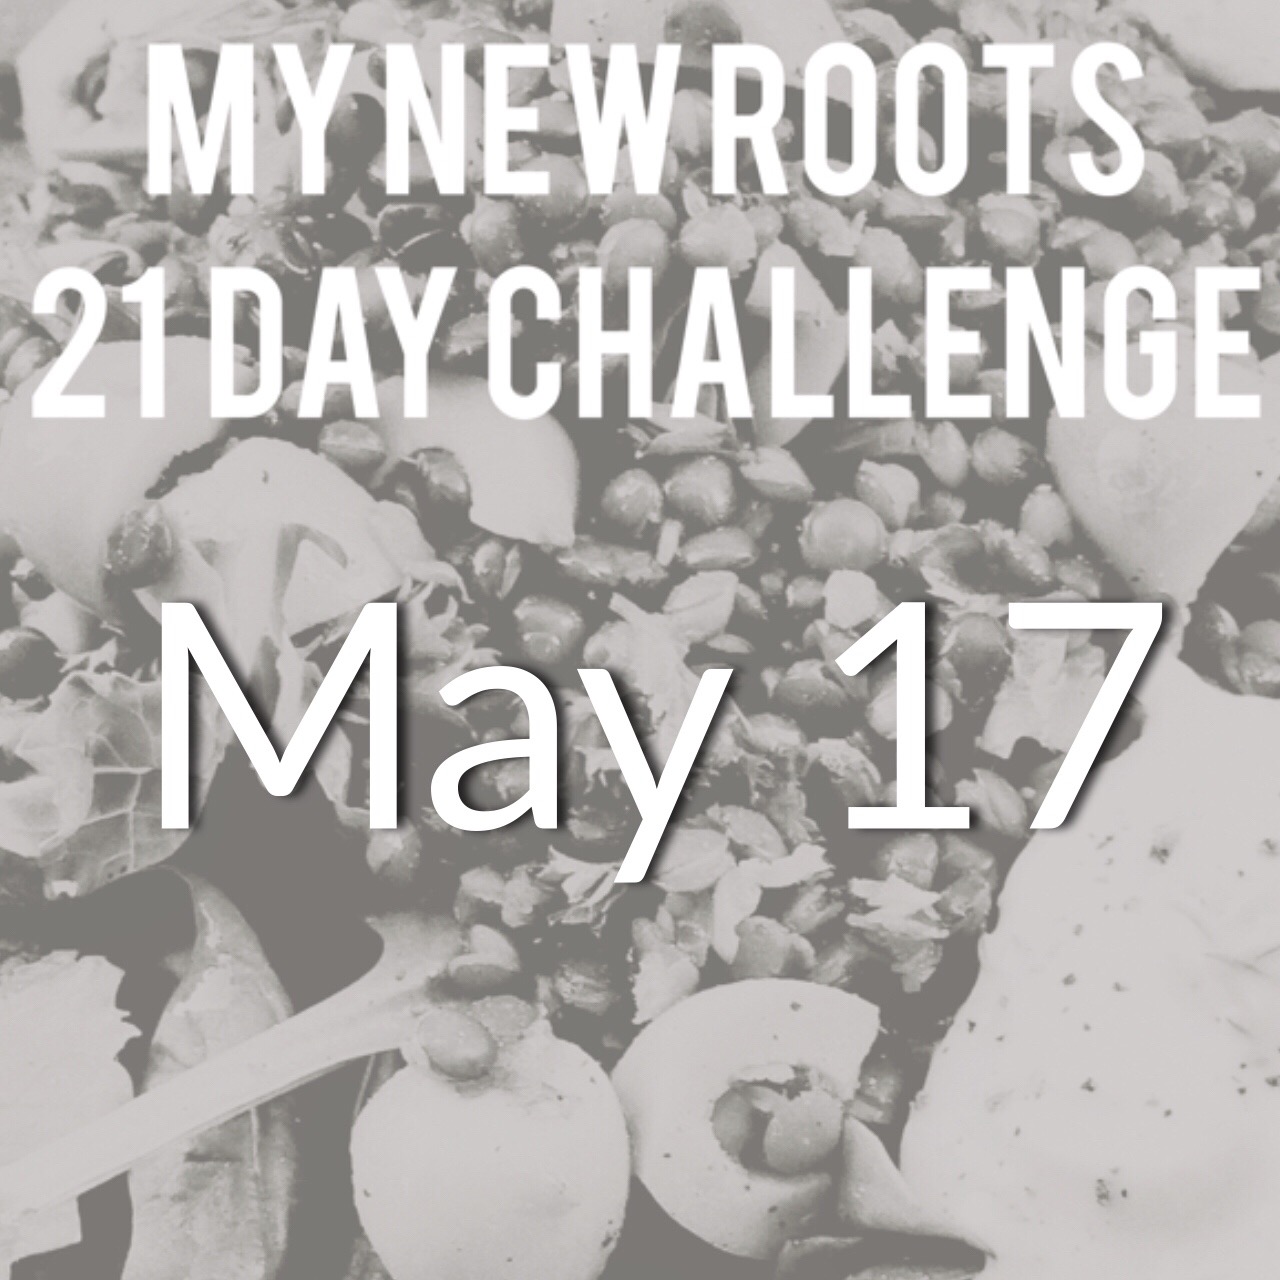 My New Roots 21 Day Challenge – The Details and Pantry List